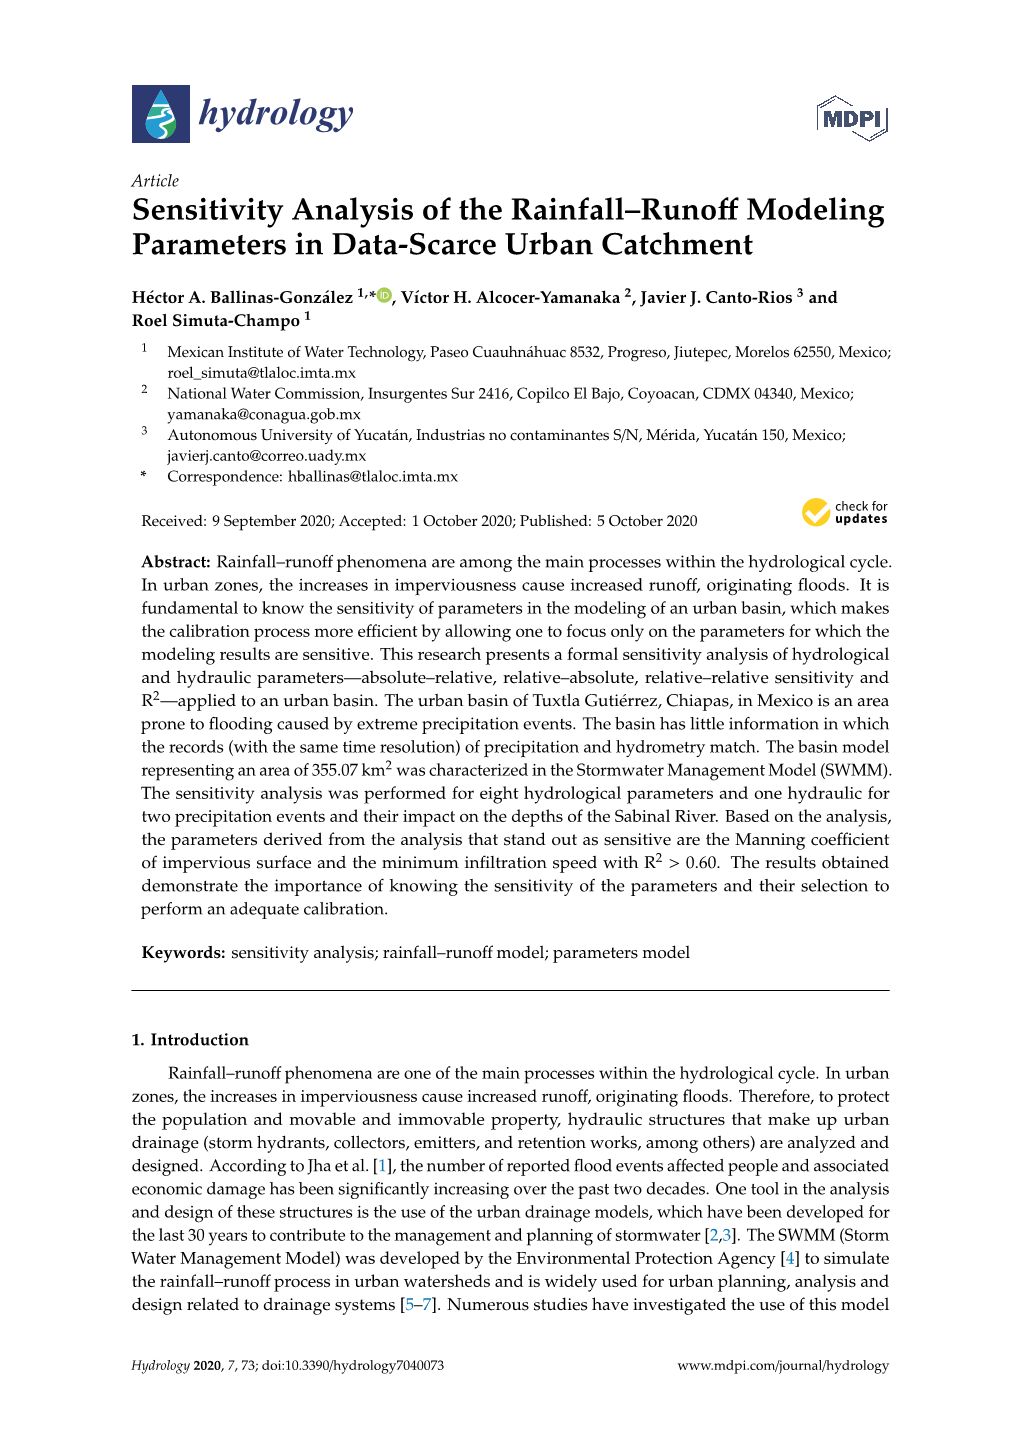 Sensitivity Analysis of the Rainfall–Runoff Modeling Parameters in Data-Scarce Urban Catchment